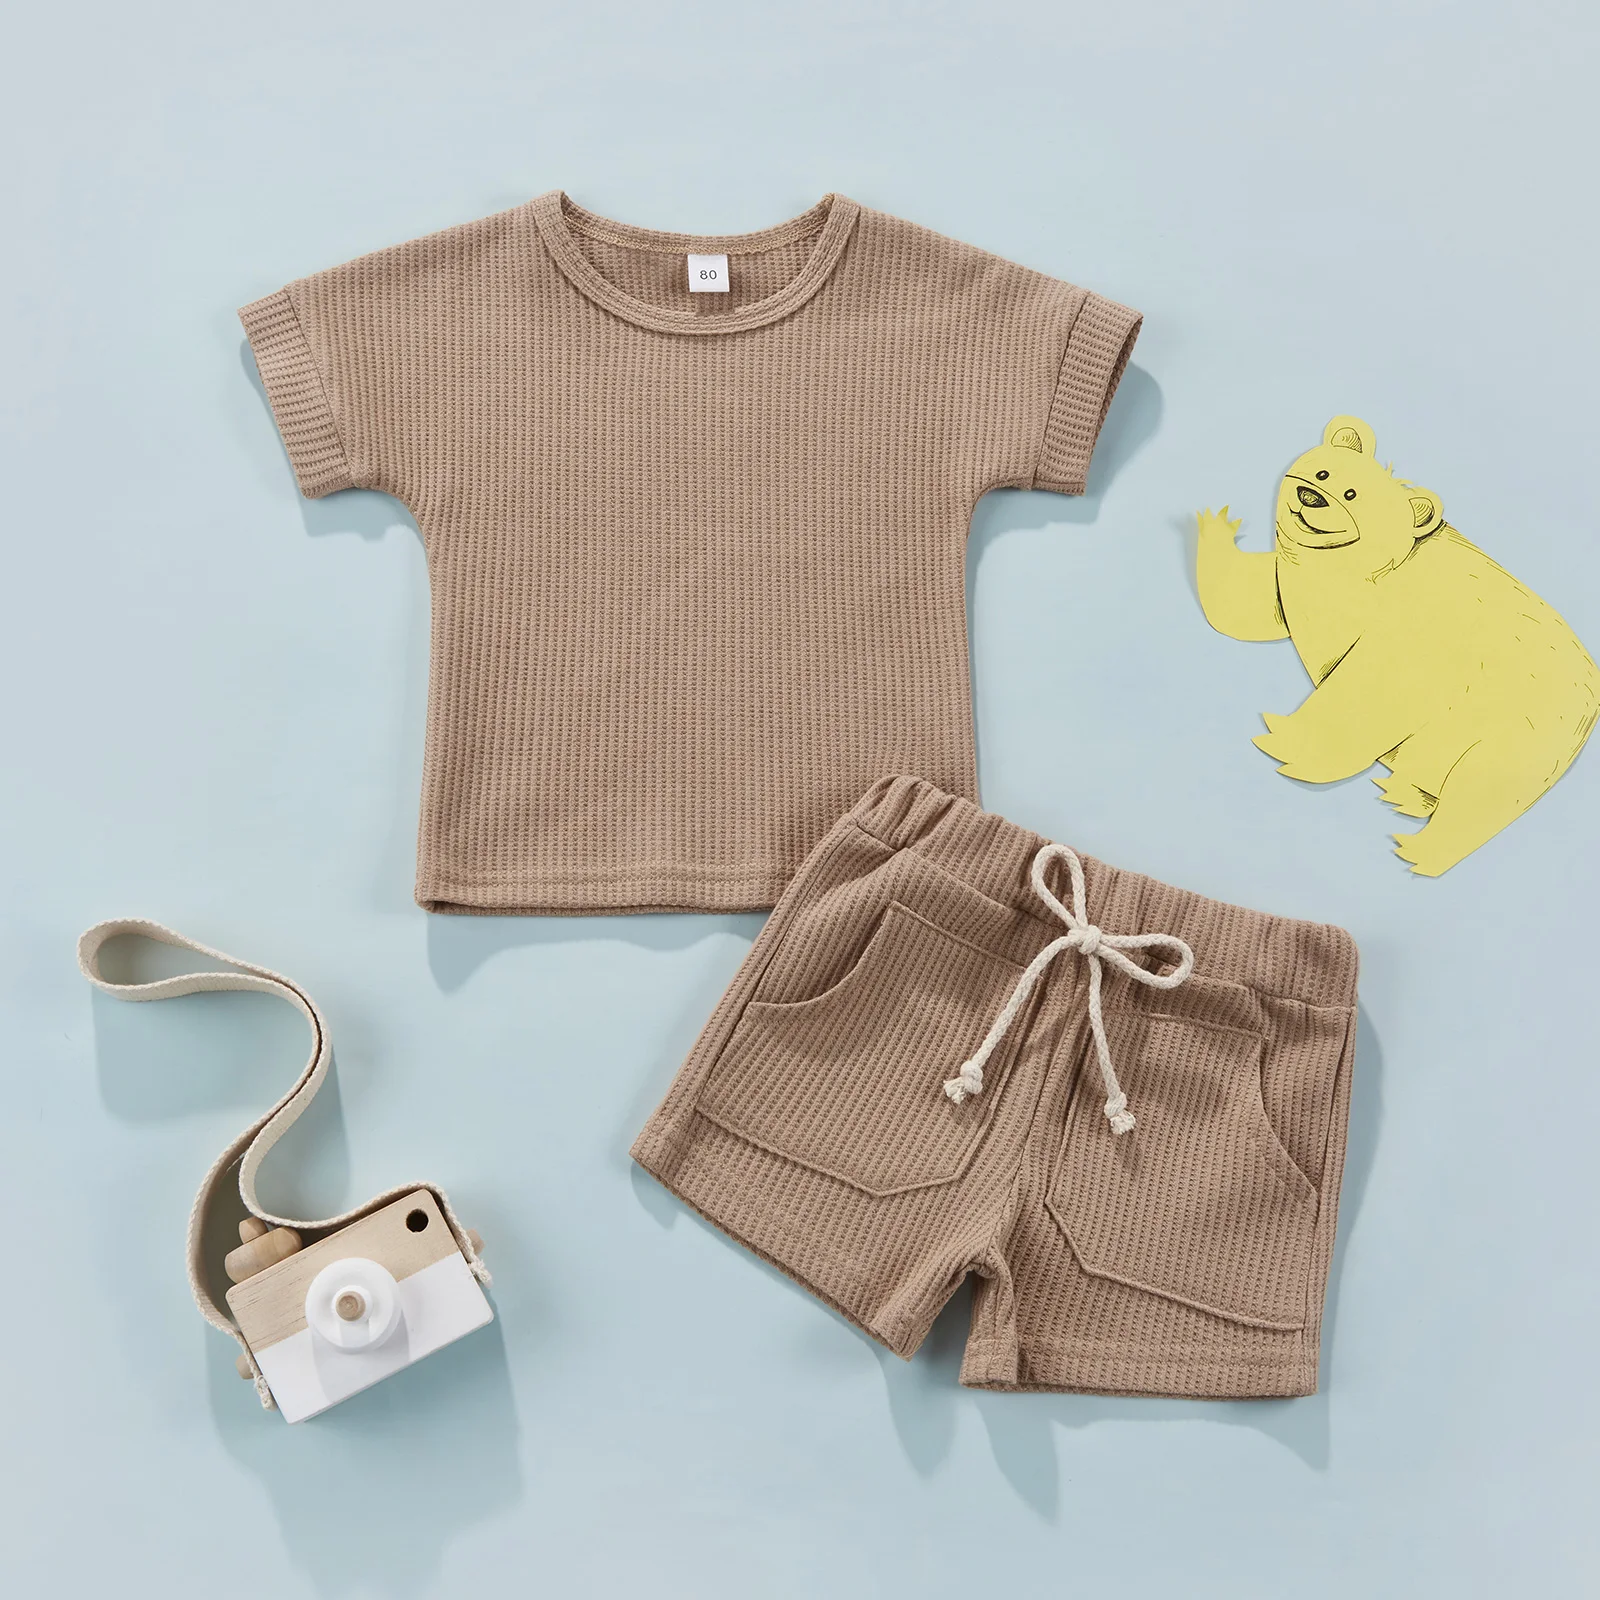 Ma&Baby 6m-4Y Toddler Infant Baby Girls Boys Clothes Set Knitted Soft Outfits Short Sleeve T shirt Shorts Summer Costumes D35 baby girl cotton clothing set